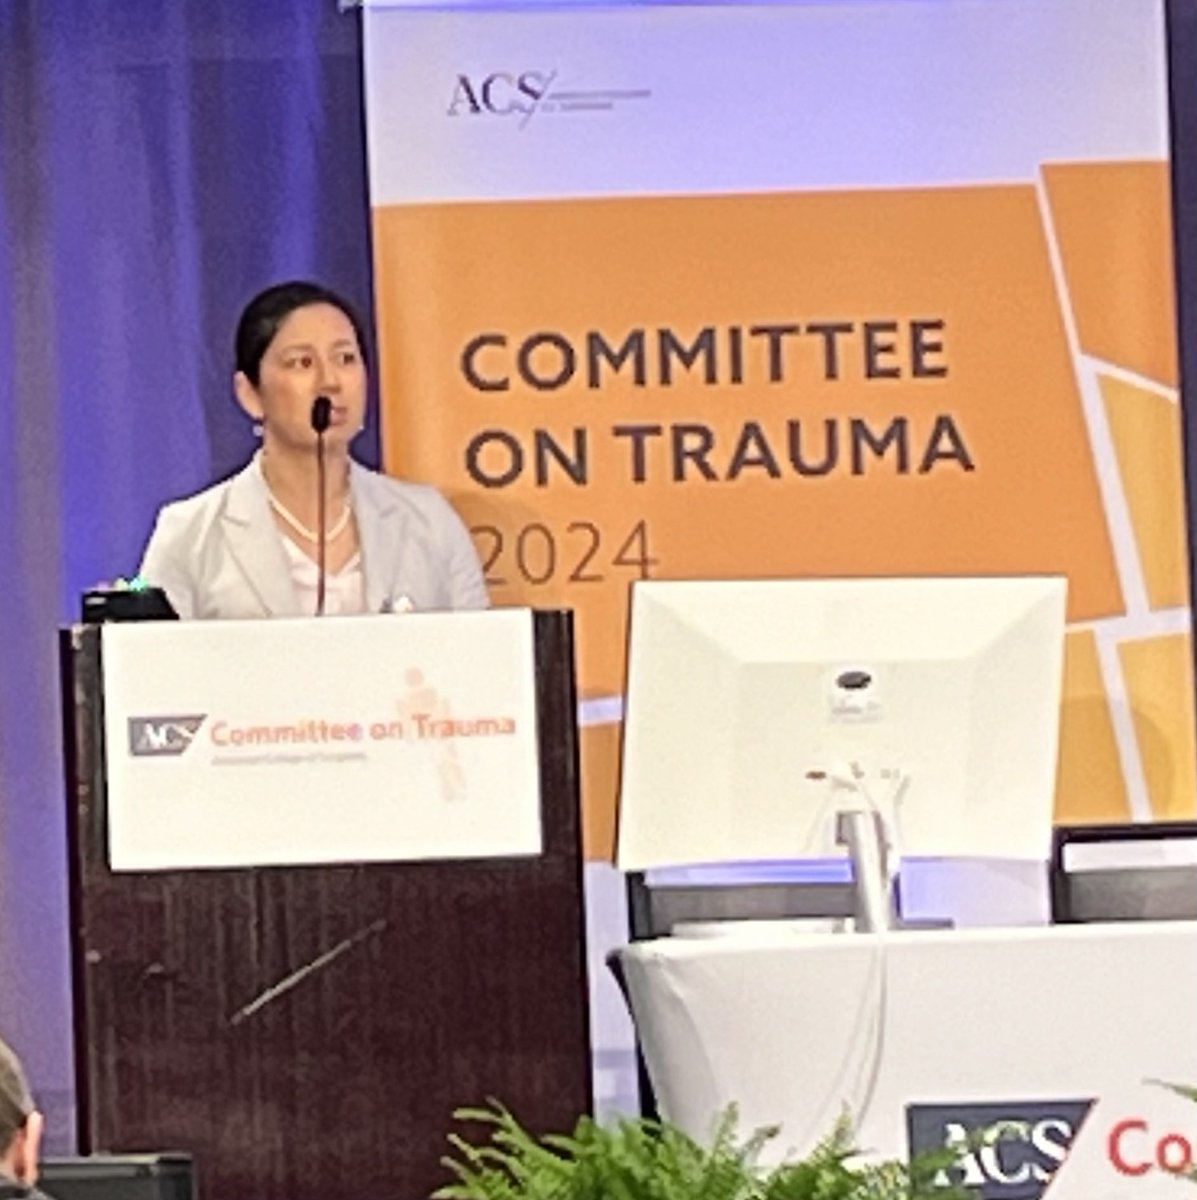 Dr Teri Chen speaking at the ACS COT advocacy session on automated crash notifications. #acscot24 ⁦@UCIrvineSurgery⁩ ⁦@UCI_Trauma⁩